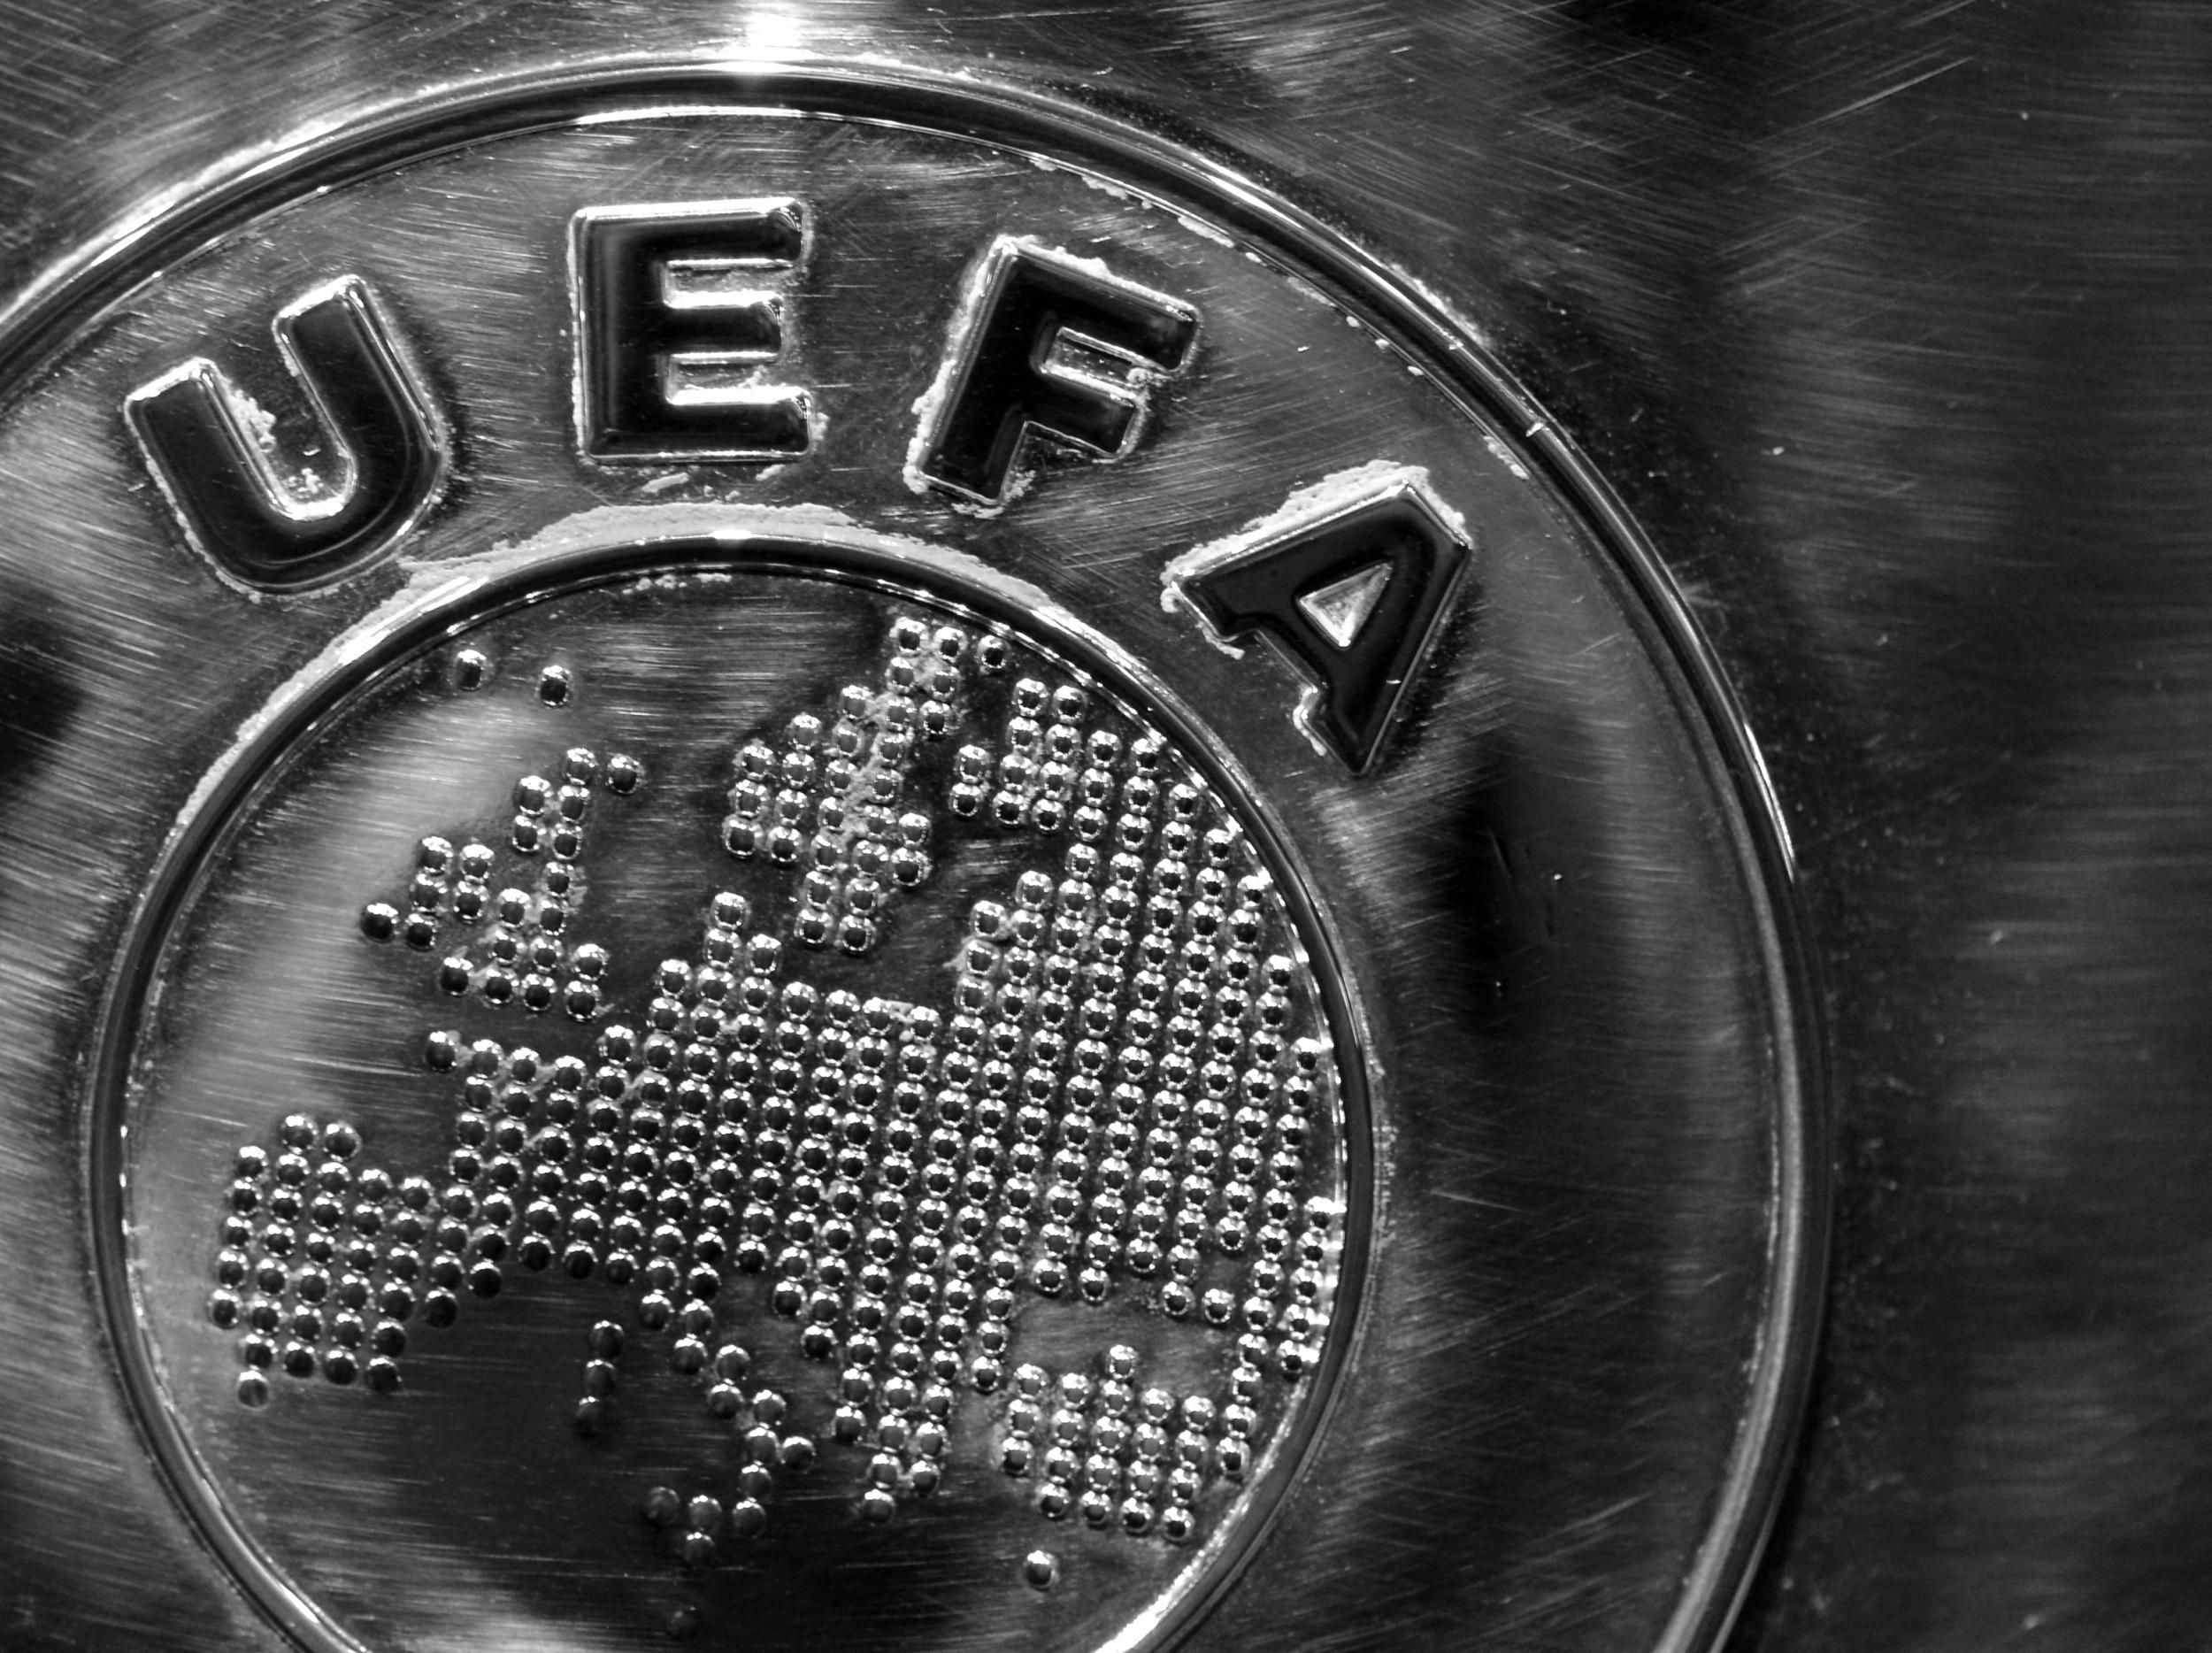 Uefa is in a difficult position